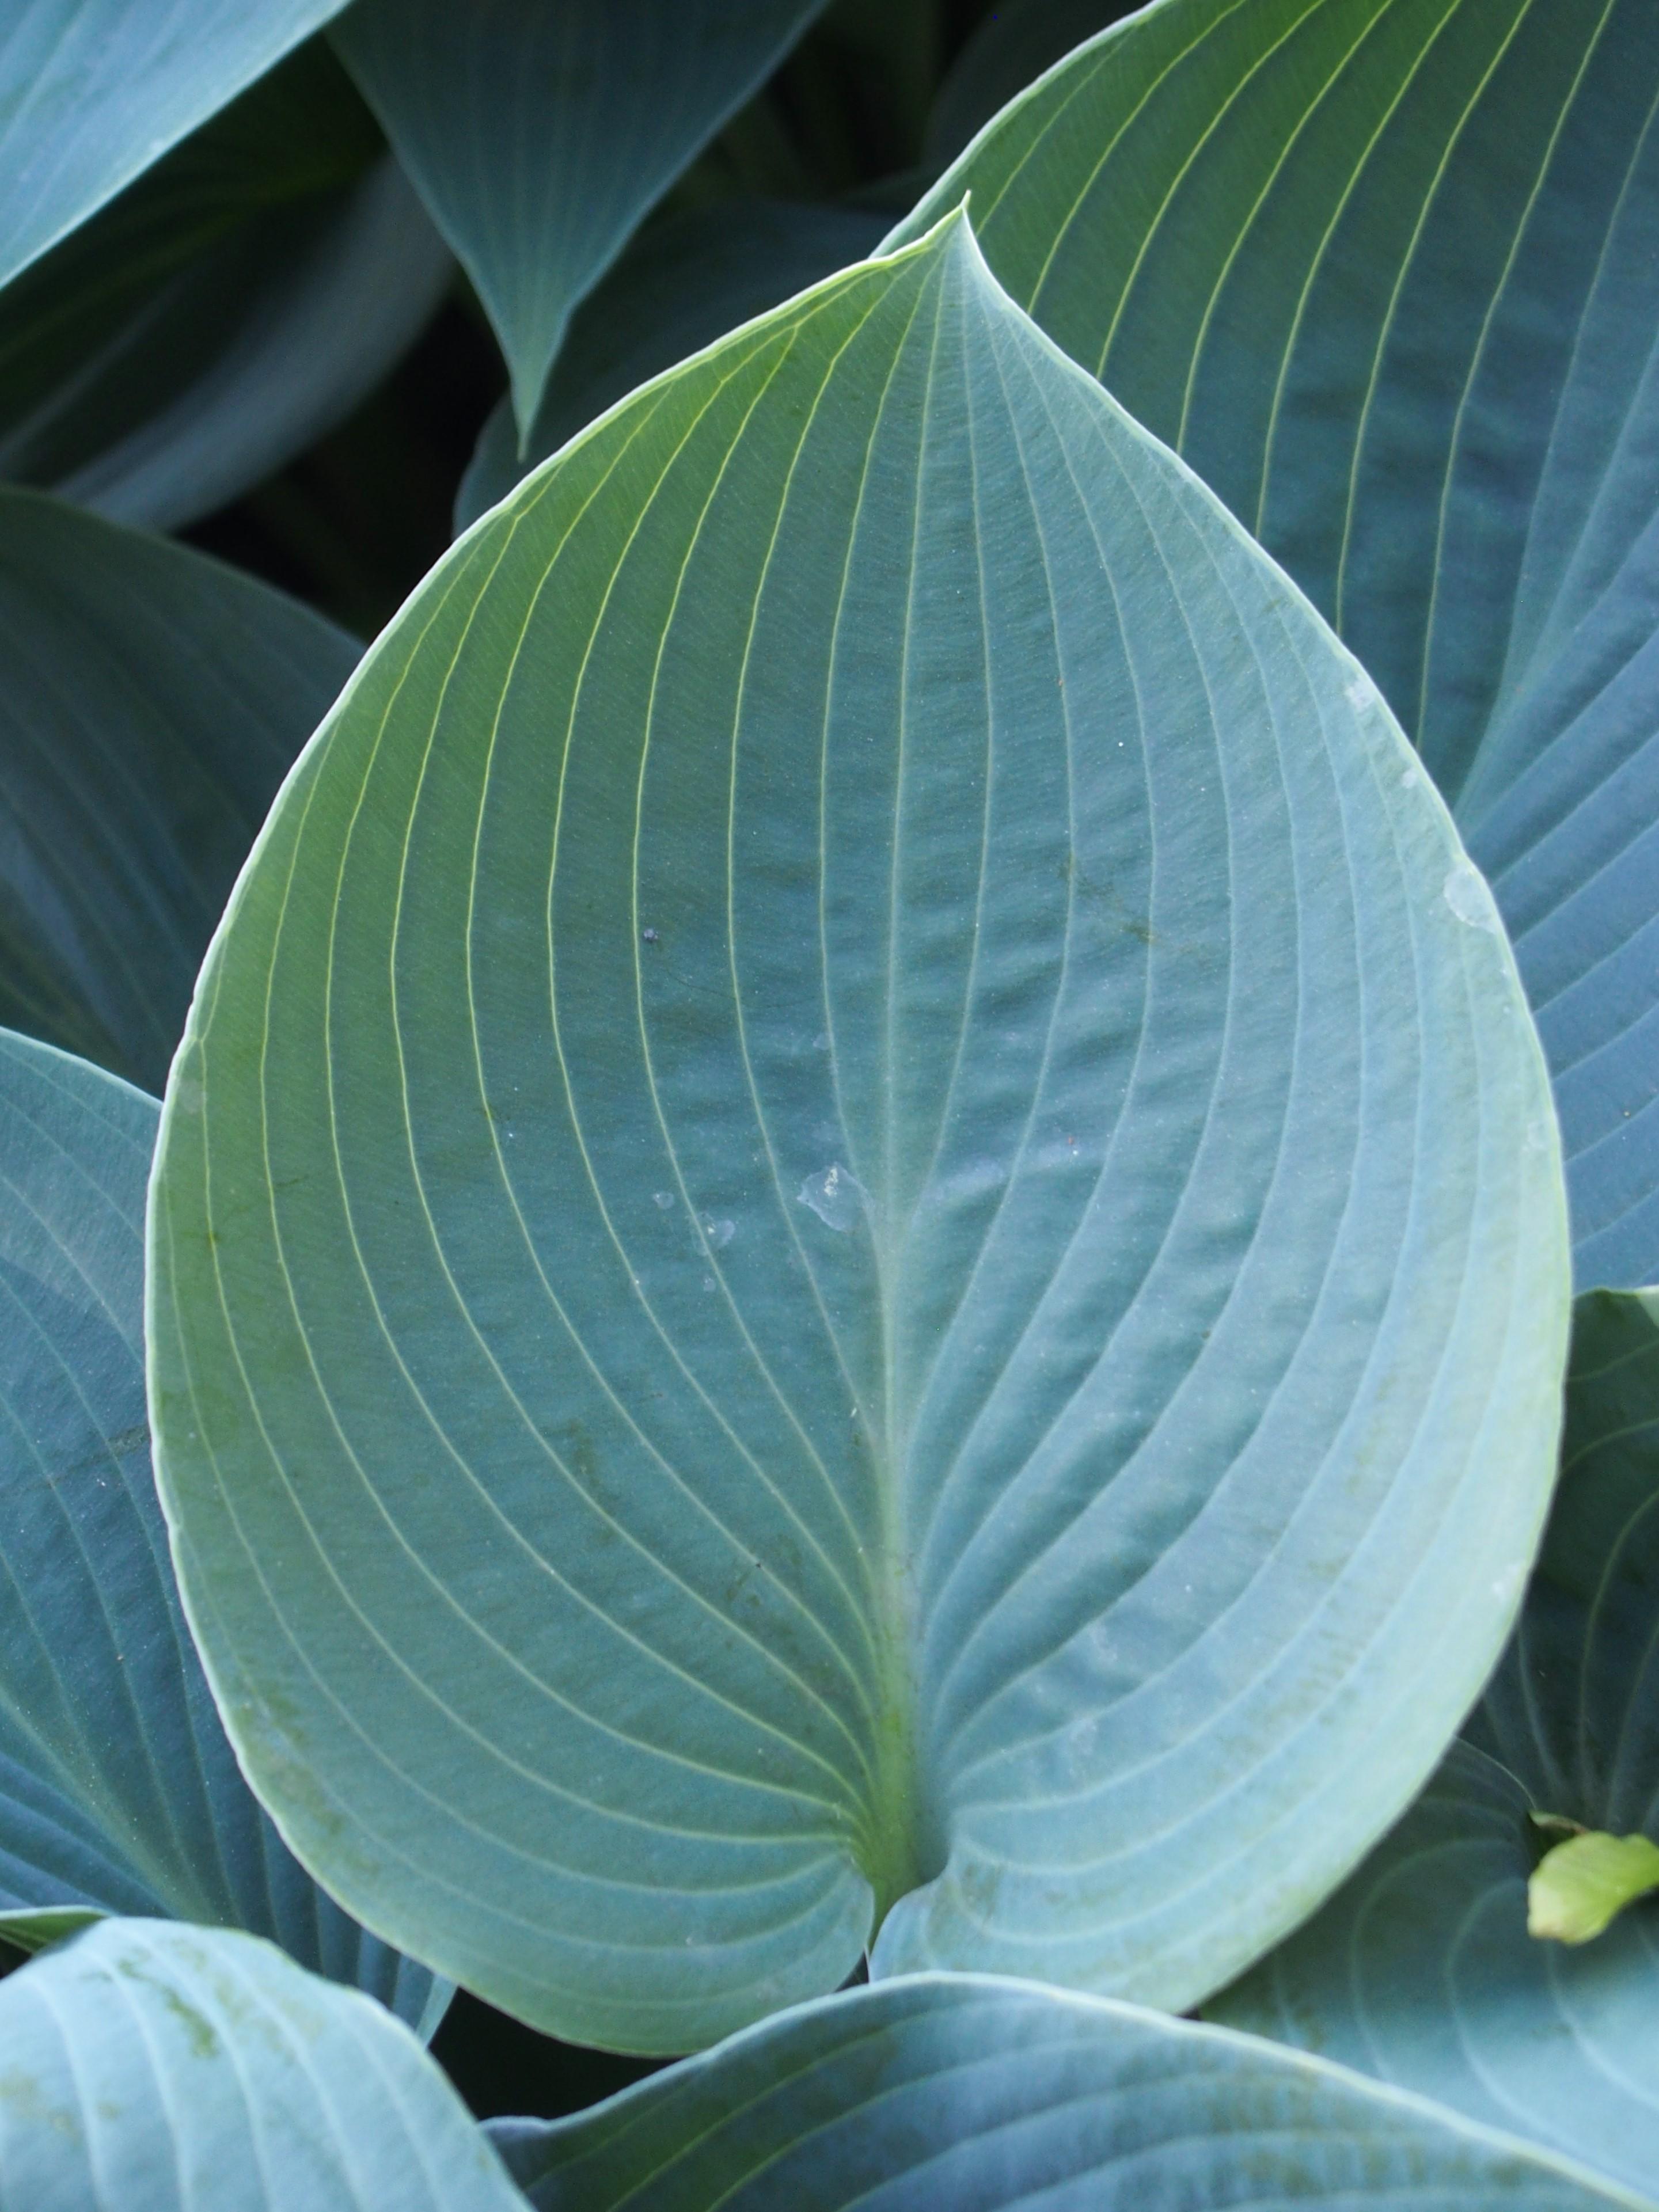 Light-green leaves with white blades, yellow midrib and veins.